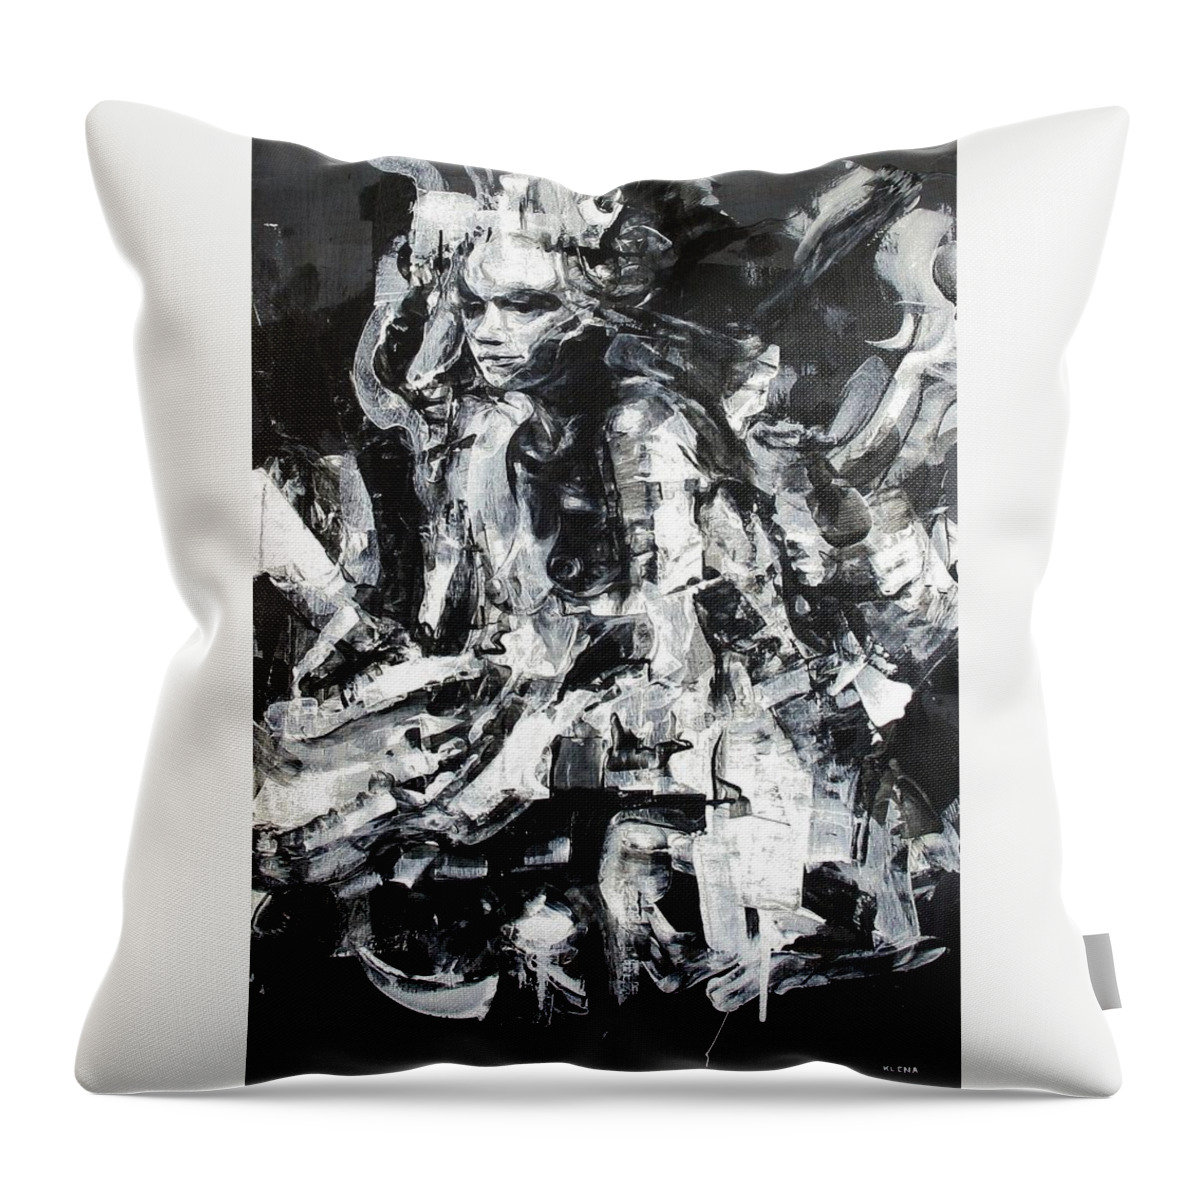 Conspiracy Throw Pillow featuring the painting Conspiracy of Silence by Jeff Klena